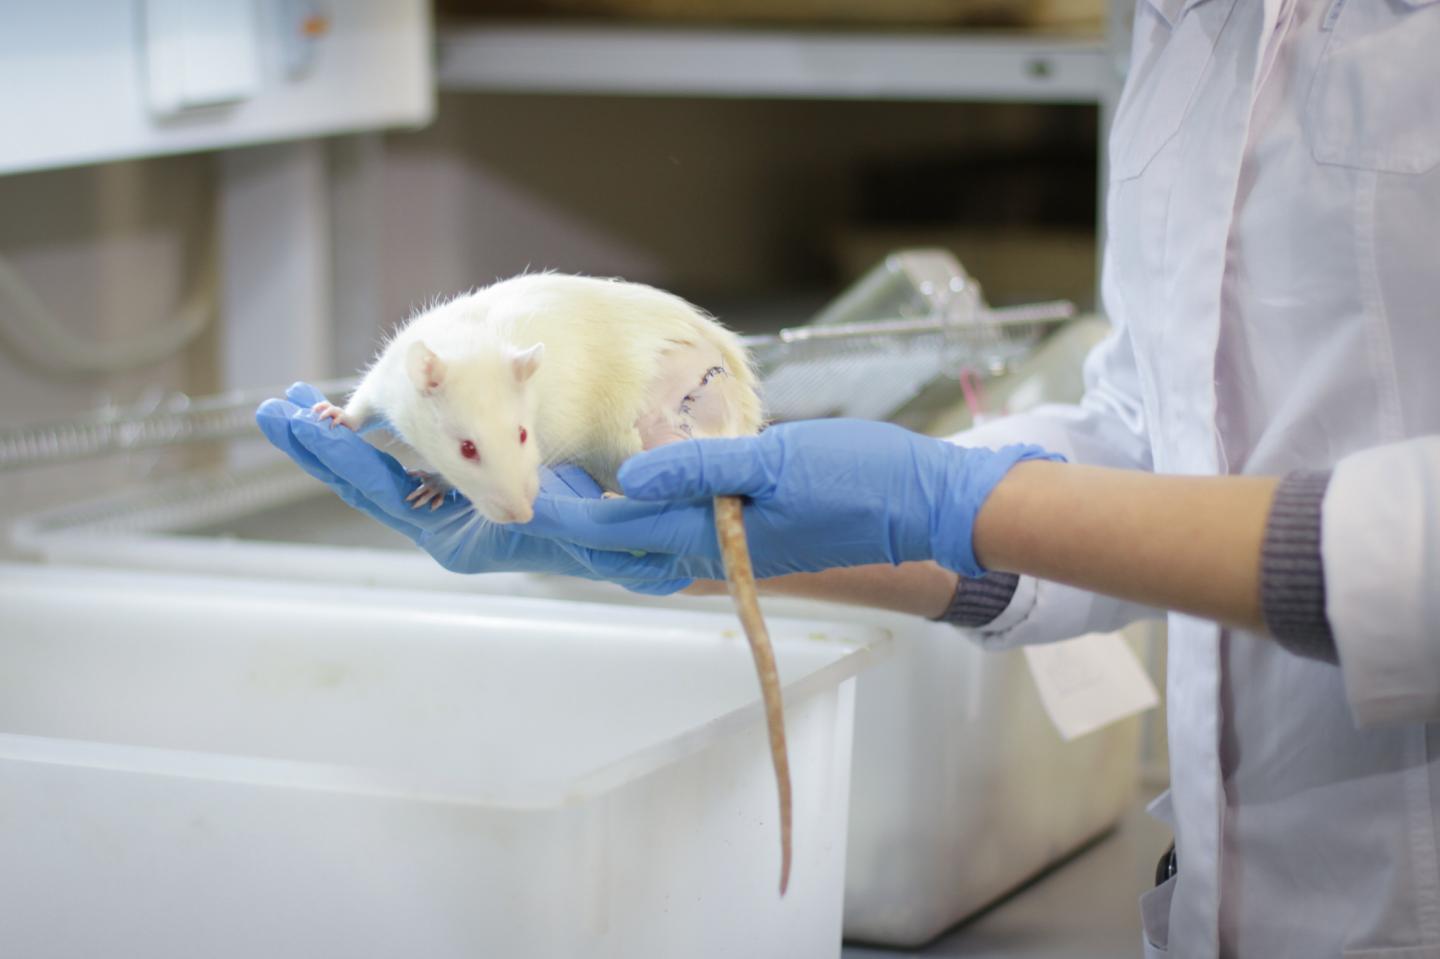 A Rat SCI Model Was Used to Examine the Efficacy of the Two Methods